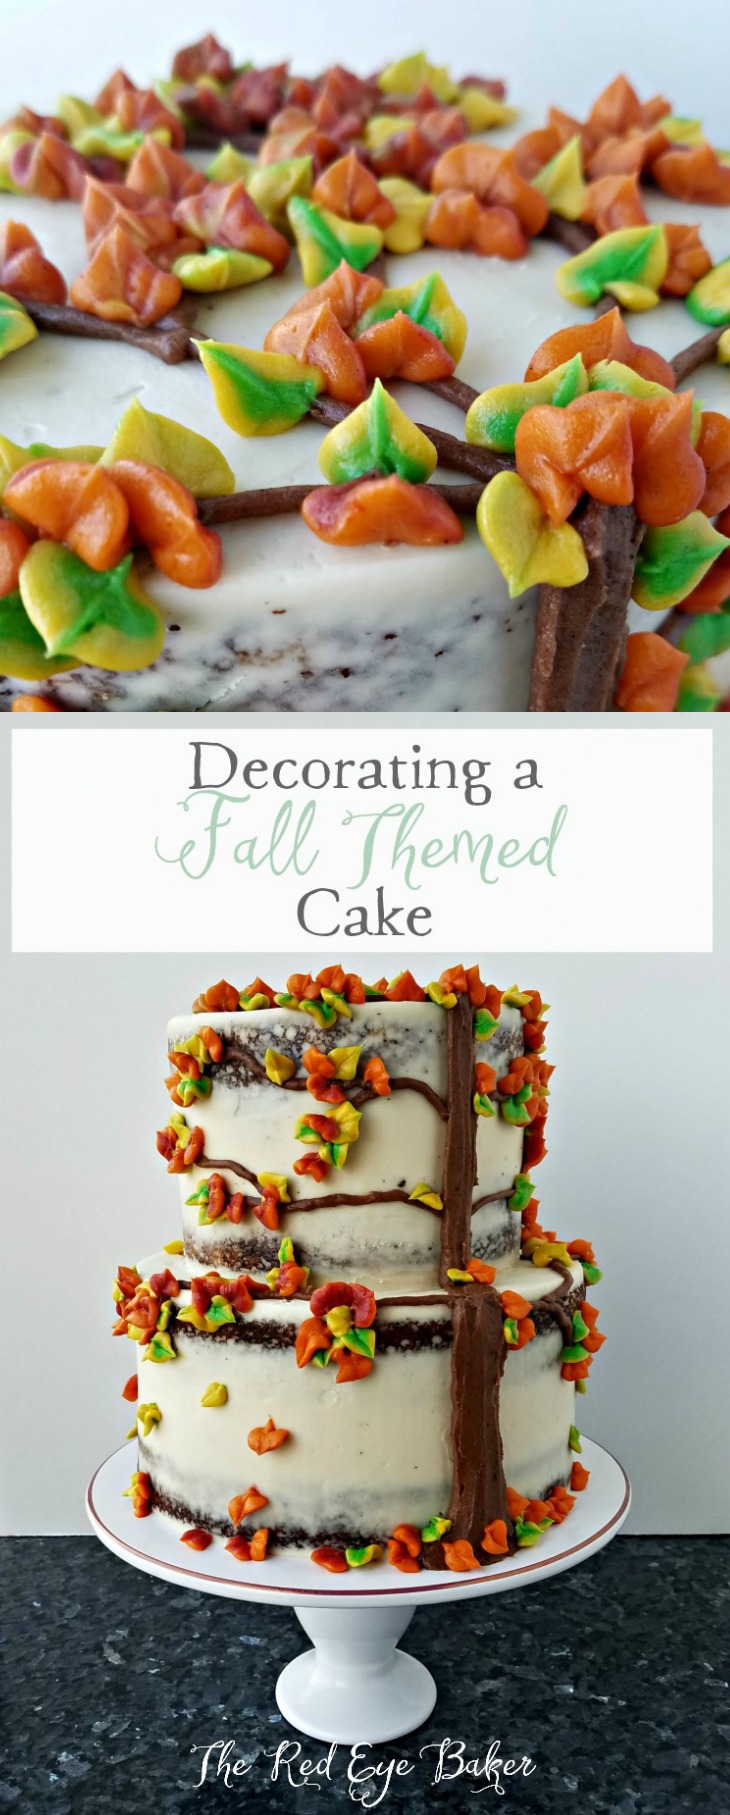 Decorating a Fall Themed Cake | Celebrate fall by checking out my tips for Decorating a Fall Themed Cake. All you need is some fall inspiration and some buttercream and a cake of course.